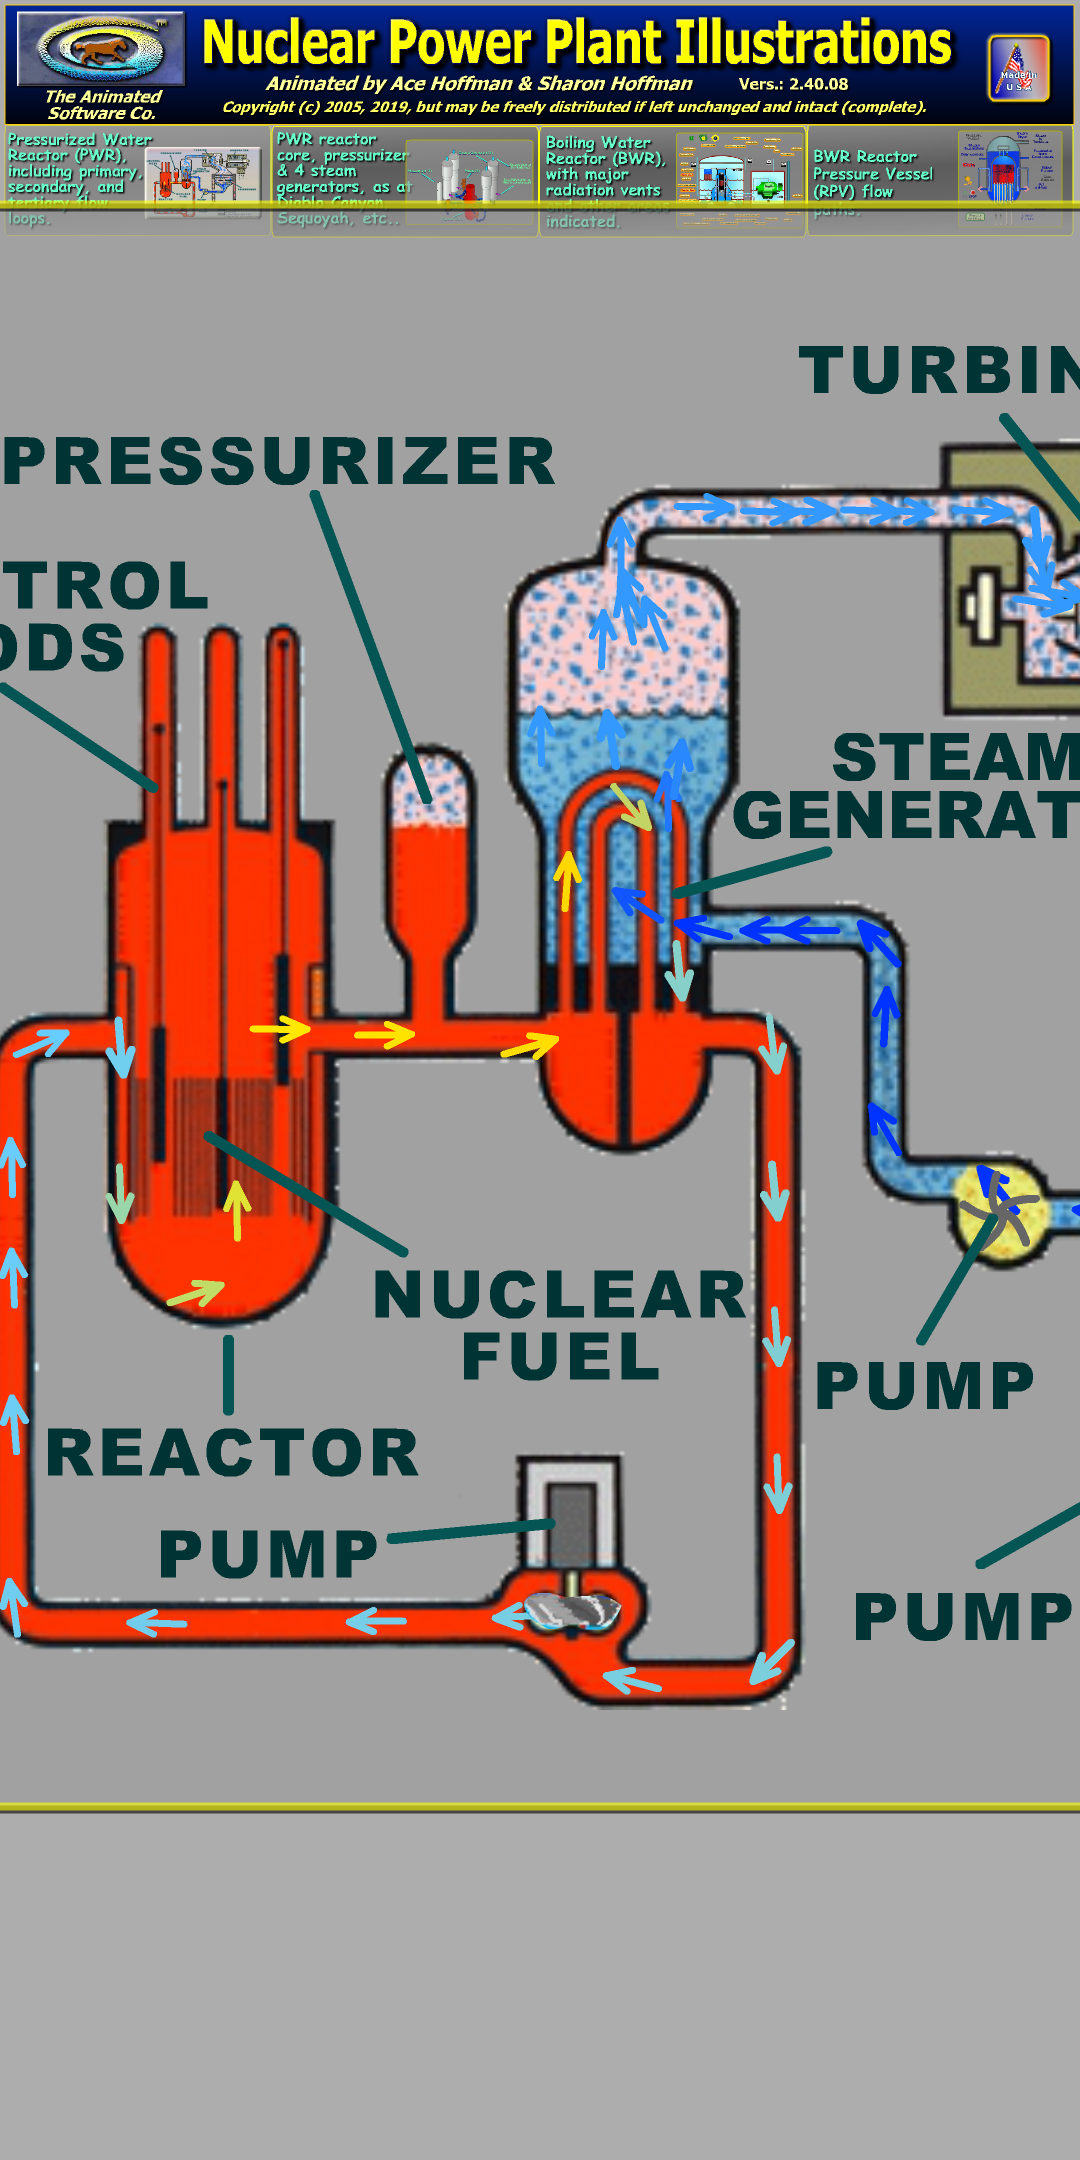 Animated PWR and BWR nuclear reactor types